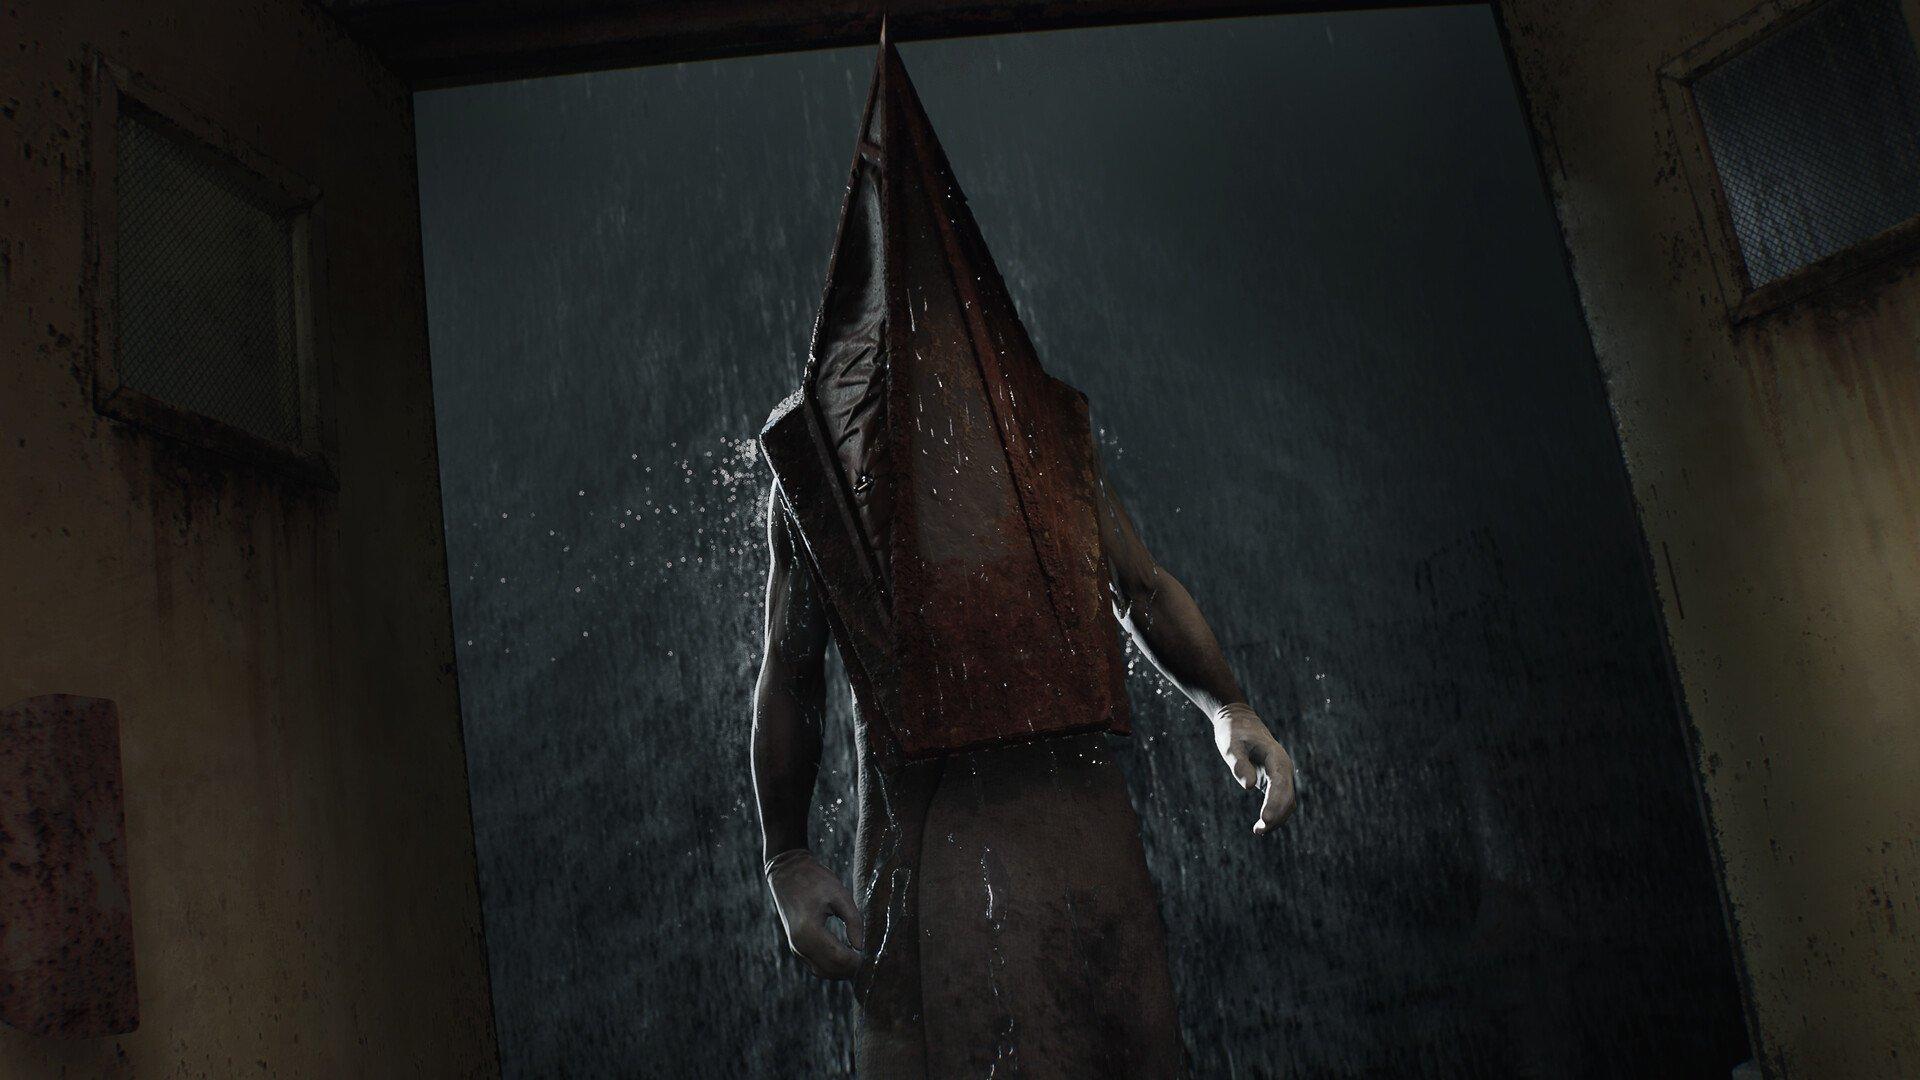 Silent Hill 2 Remake pre-orders are up on GameStop and  - Xfire